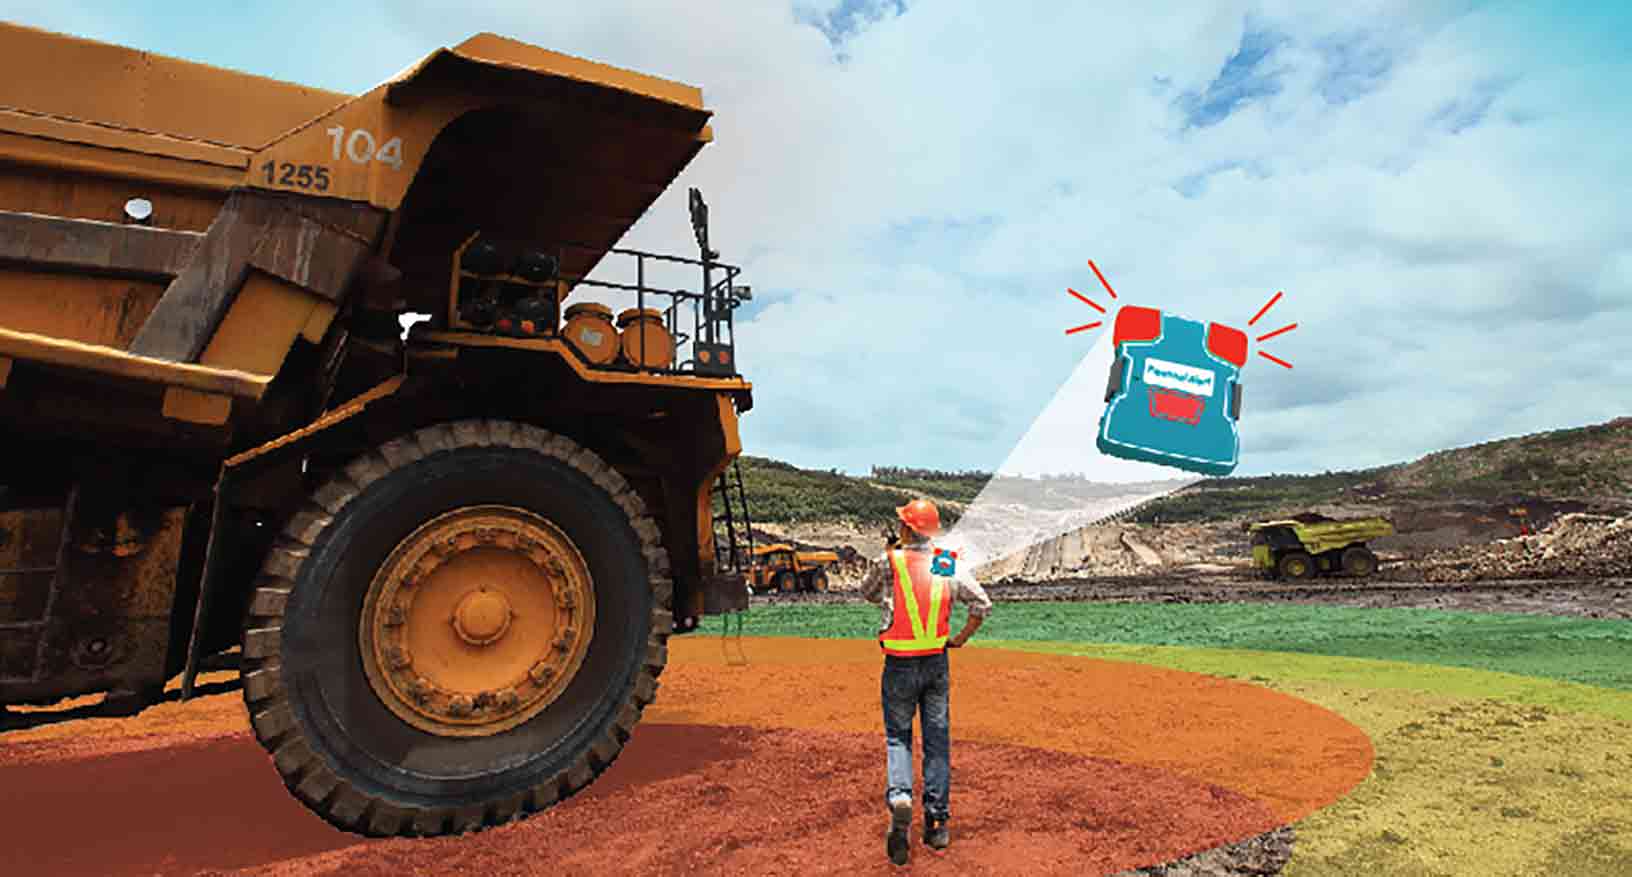 worker walking towards haul truck with a graphic icon displaying an element of Hexagon's mine safety program 